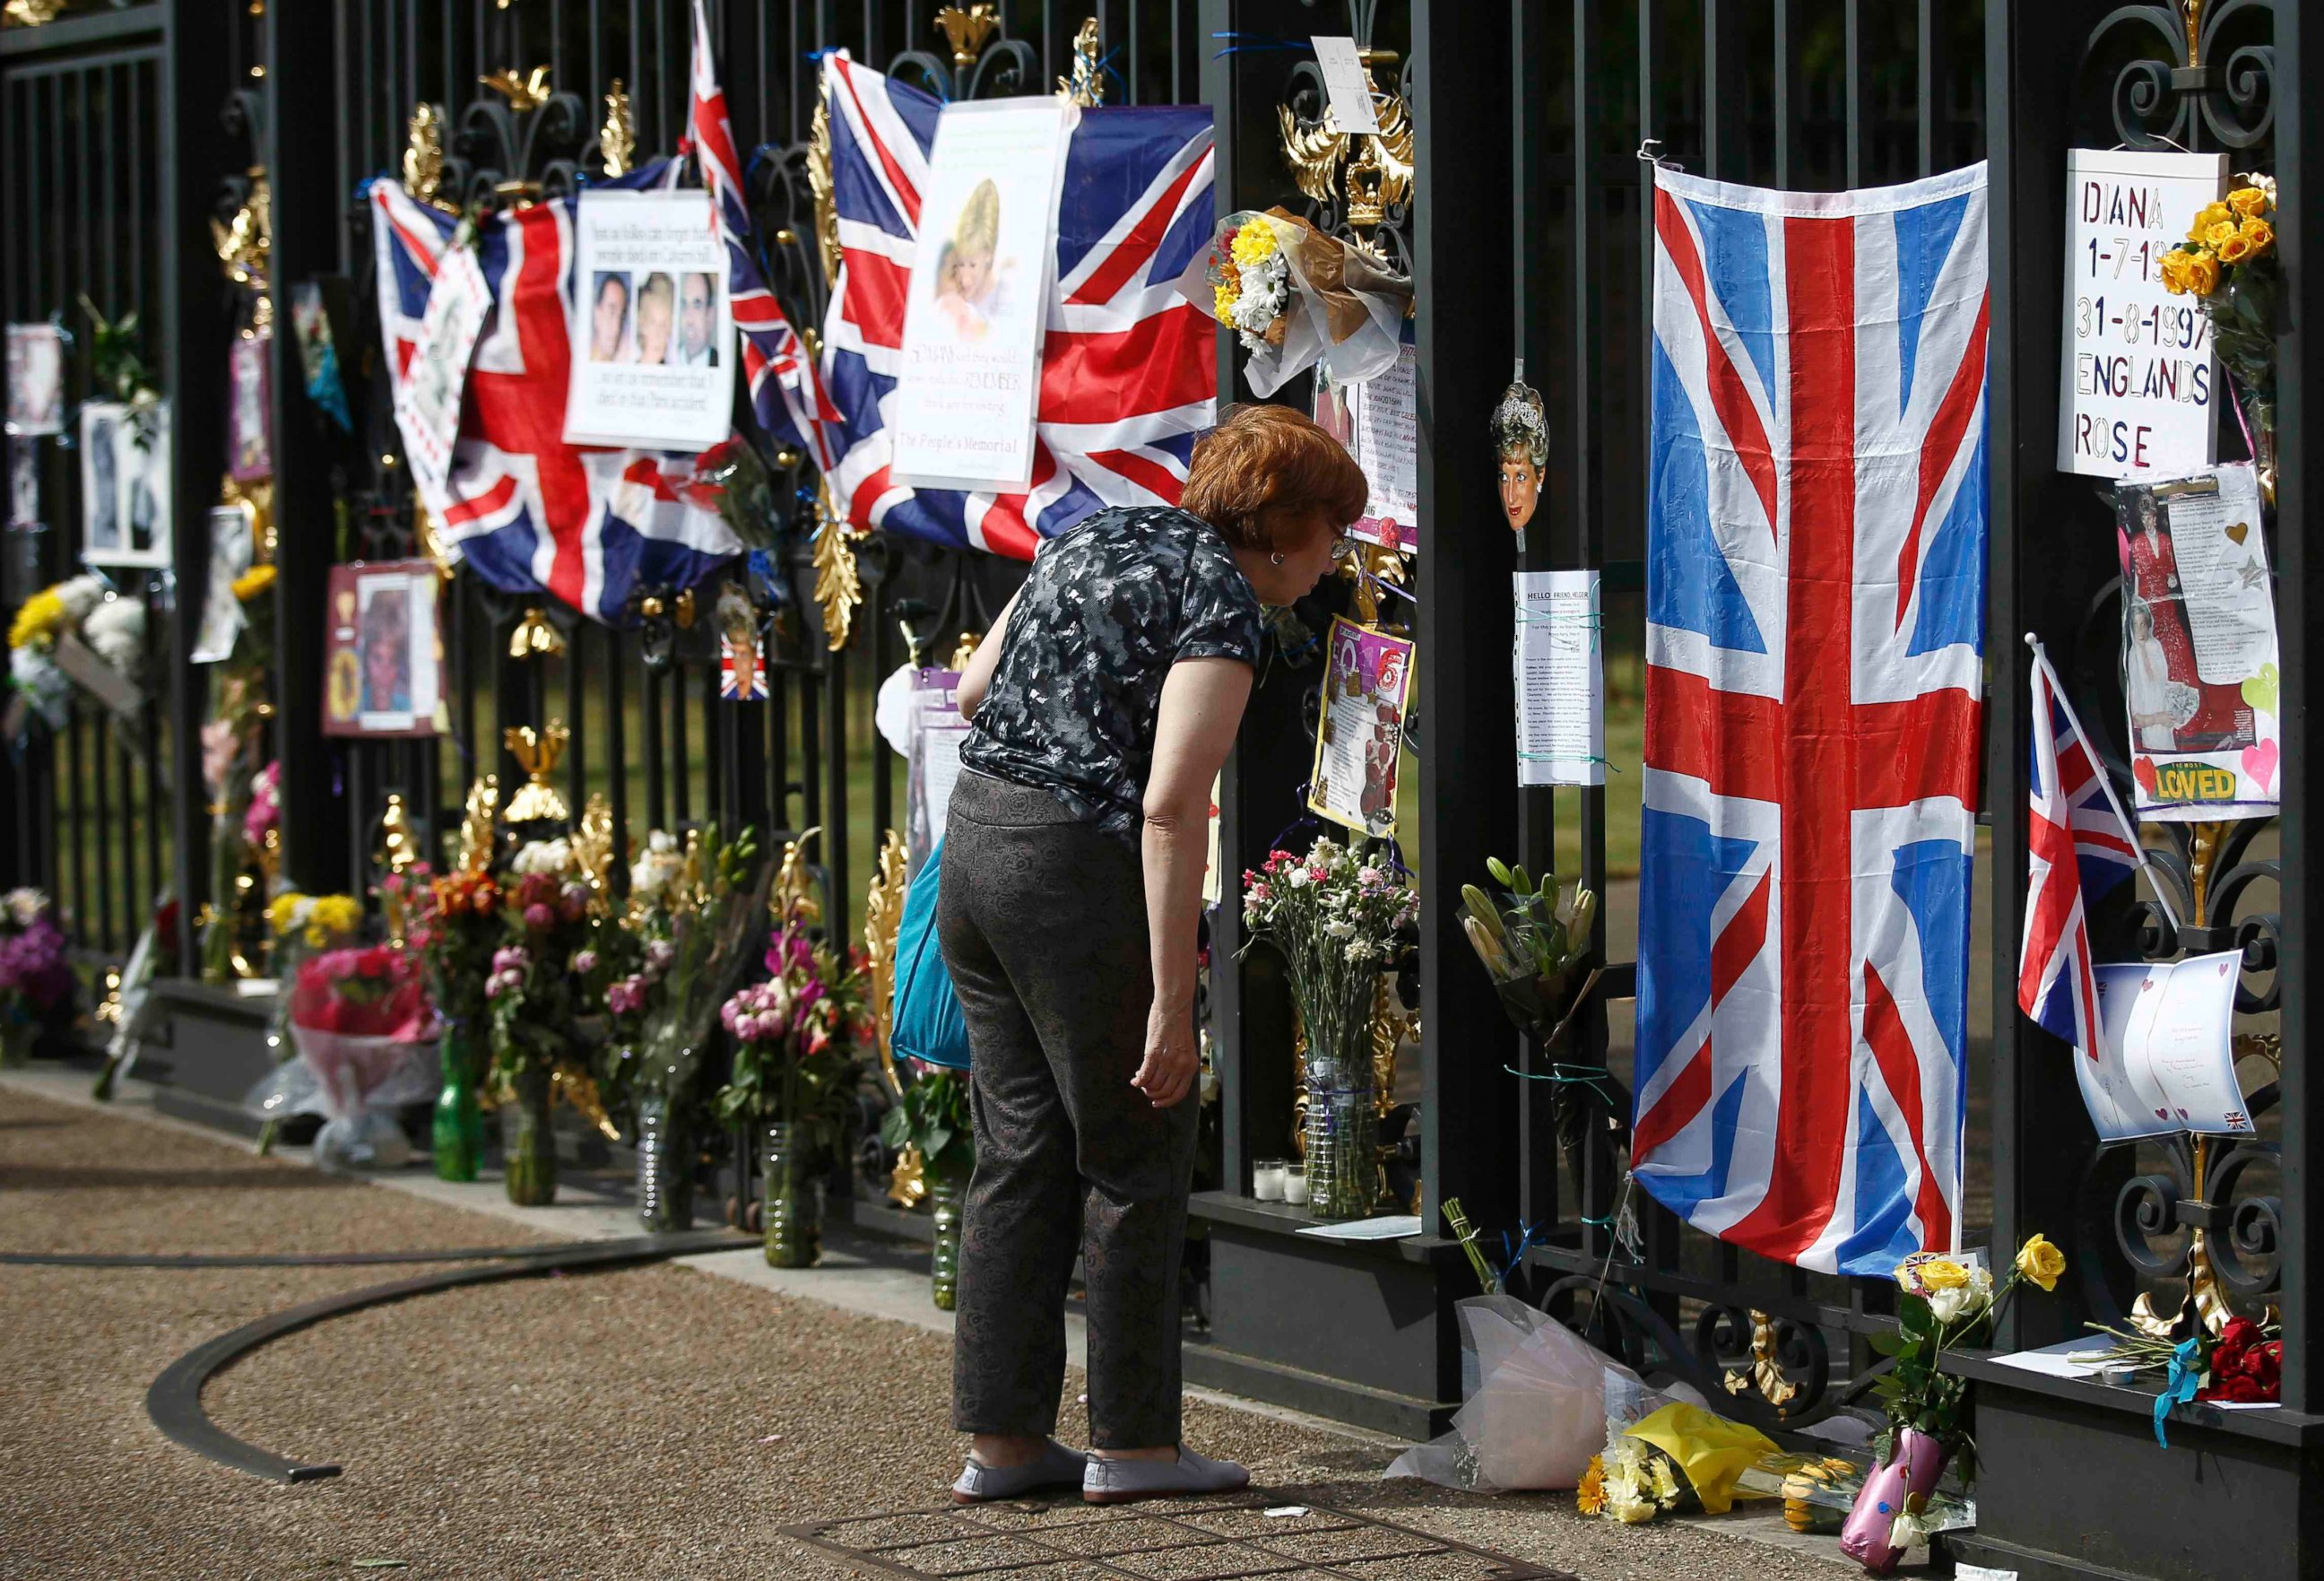 PHOTO: A woman looks at tributes left in honor of the late Princess Diana outside Kensington Palace on the 19th anniversary of her death in Paris after a car crash, in London, Britain Aug. 31, 2016.